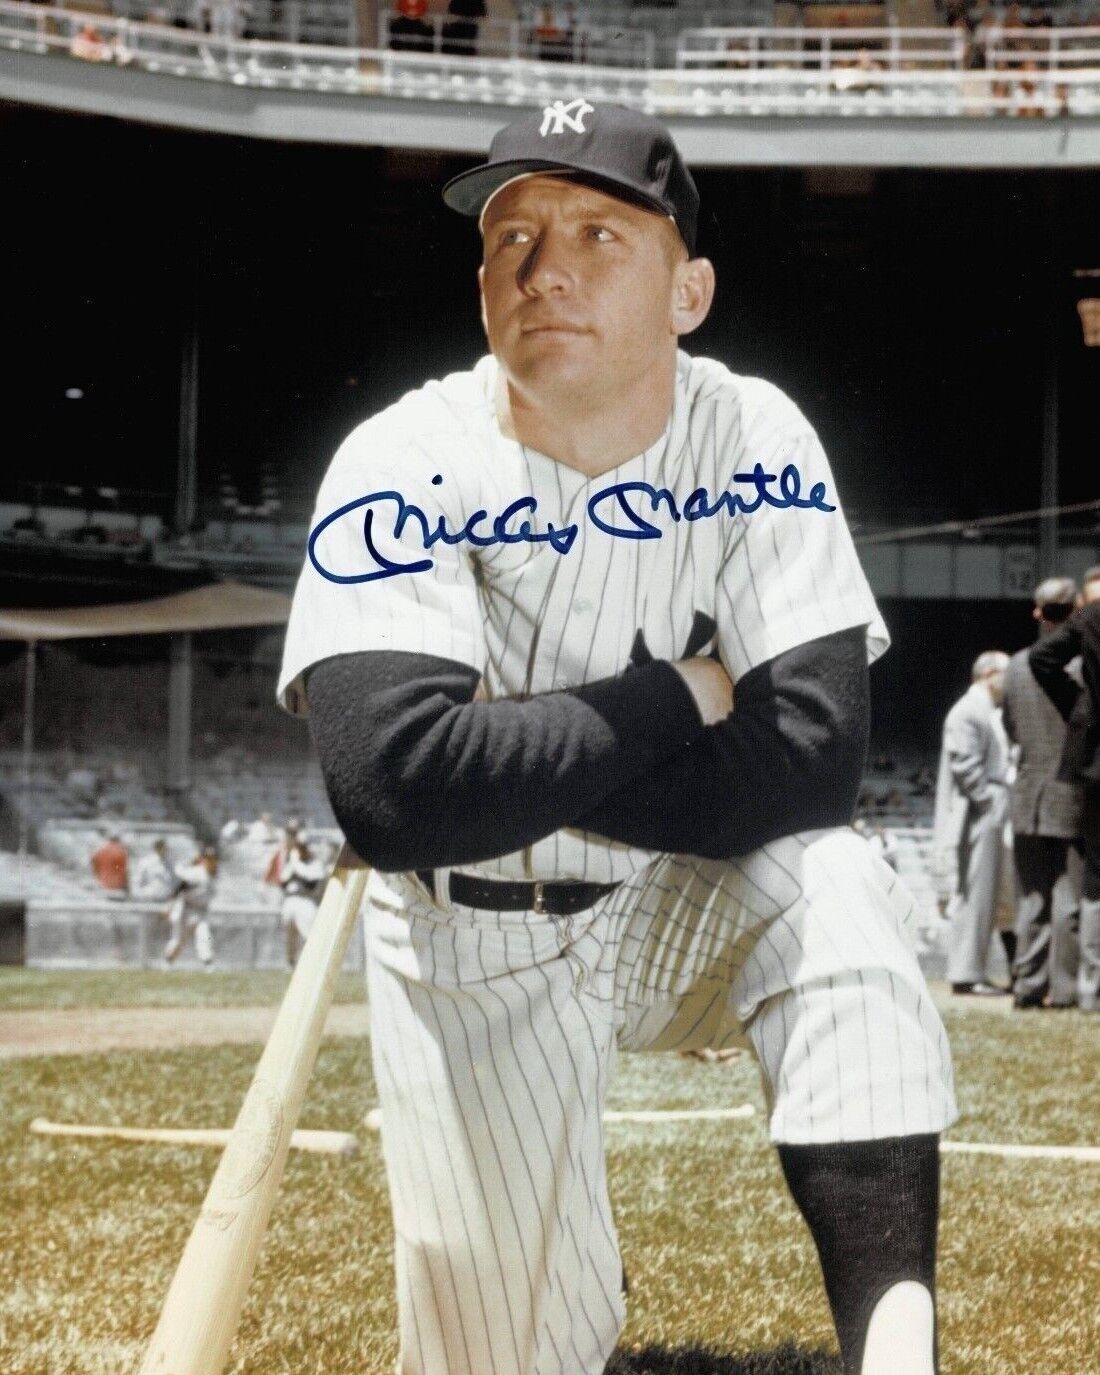 MICKEY MANTLE NEW YORK YANKEES BASEBALL PLAYER AUTOGRAPHED 8X10 PHOTO REPRINT